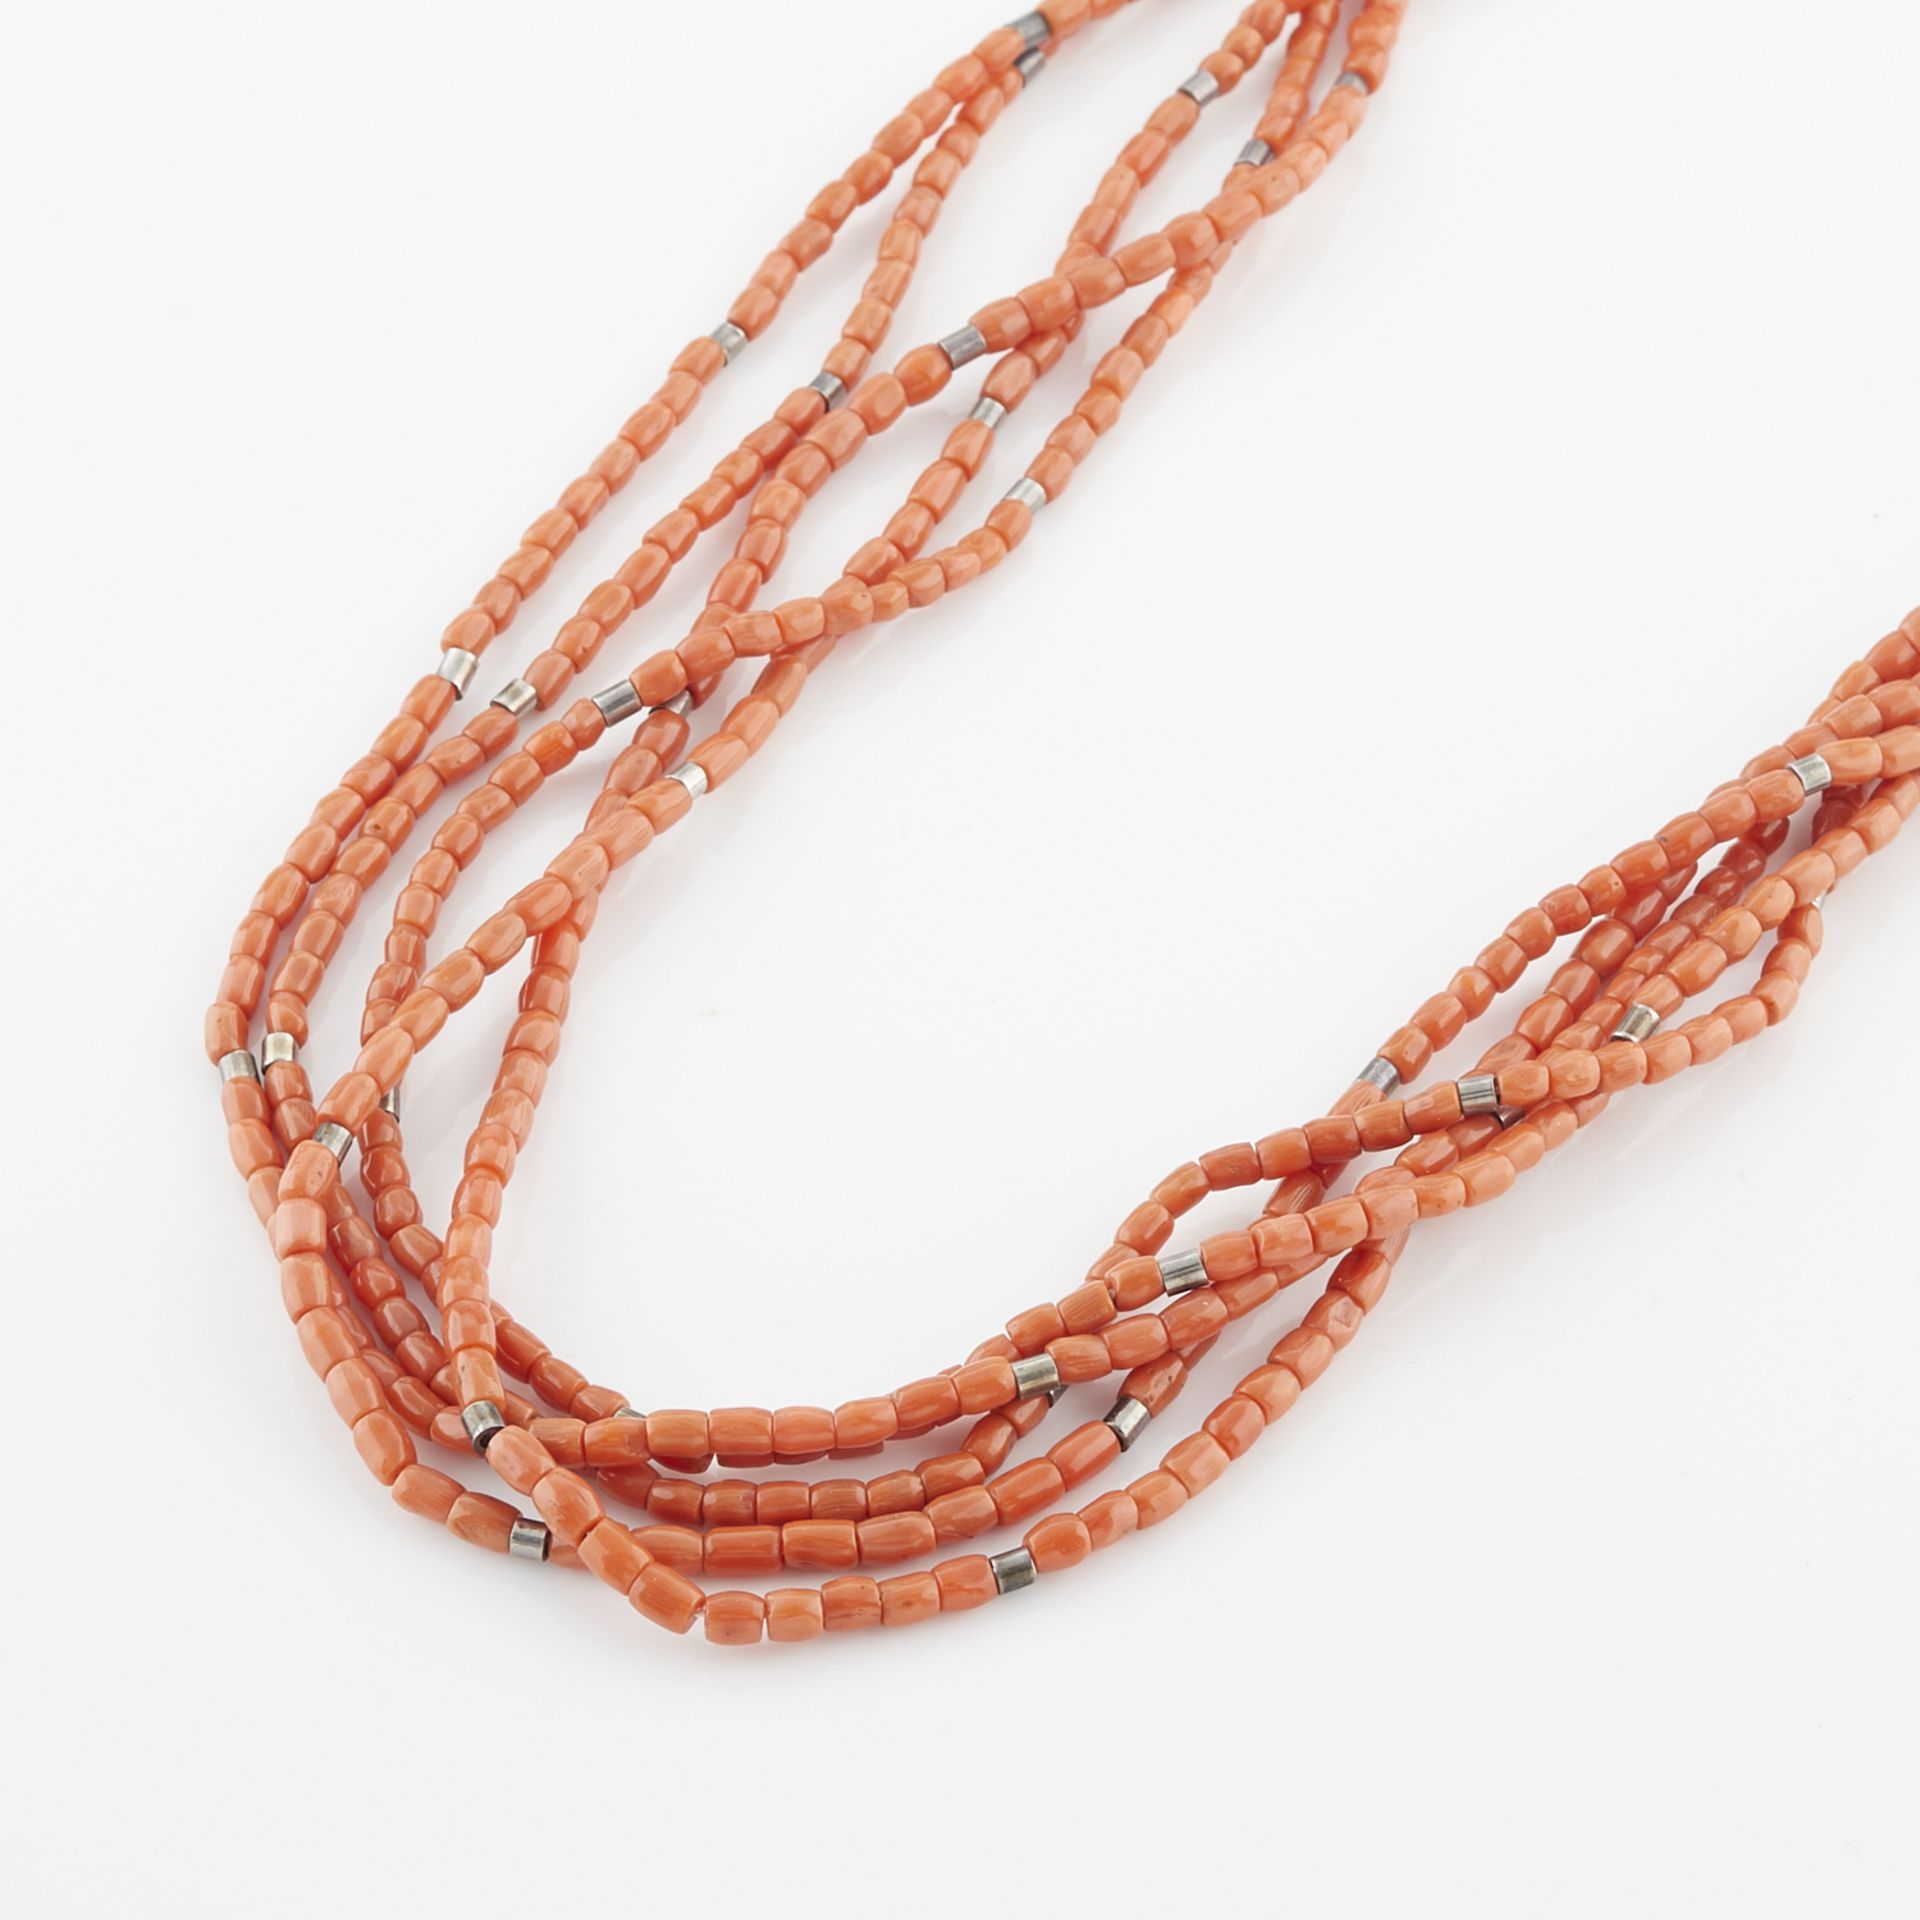 Five Strand Coral Heishi Necklace - Image 5 of 7